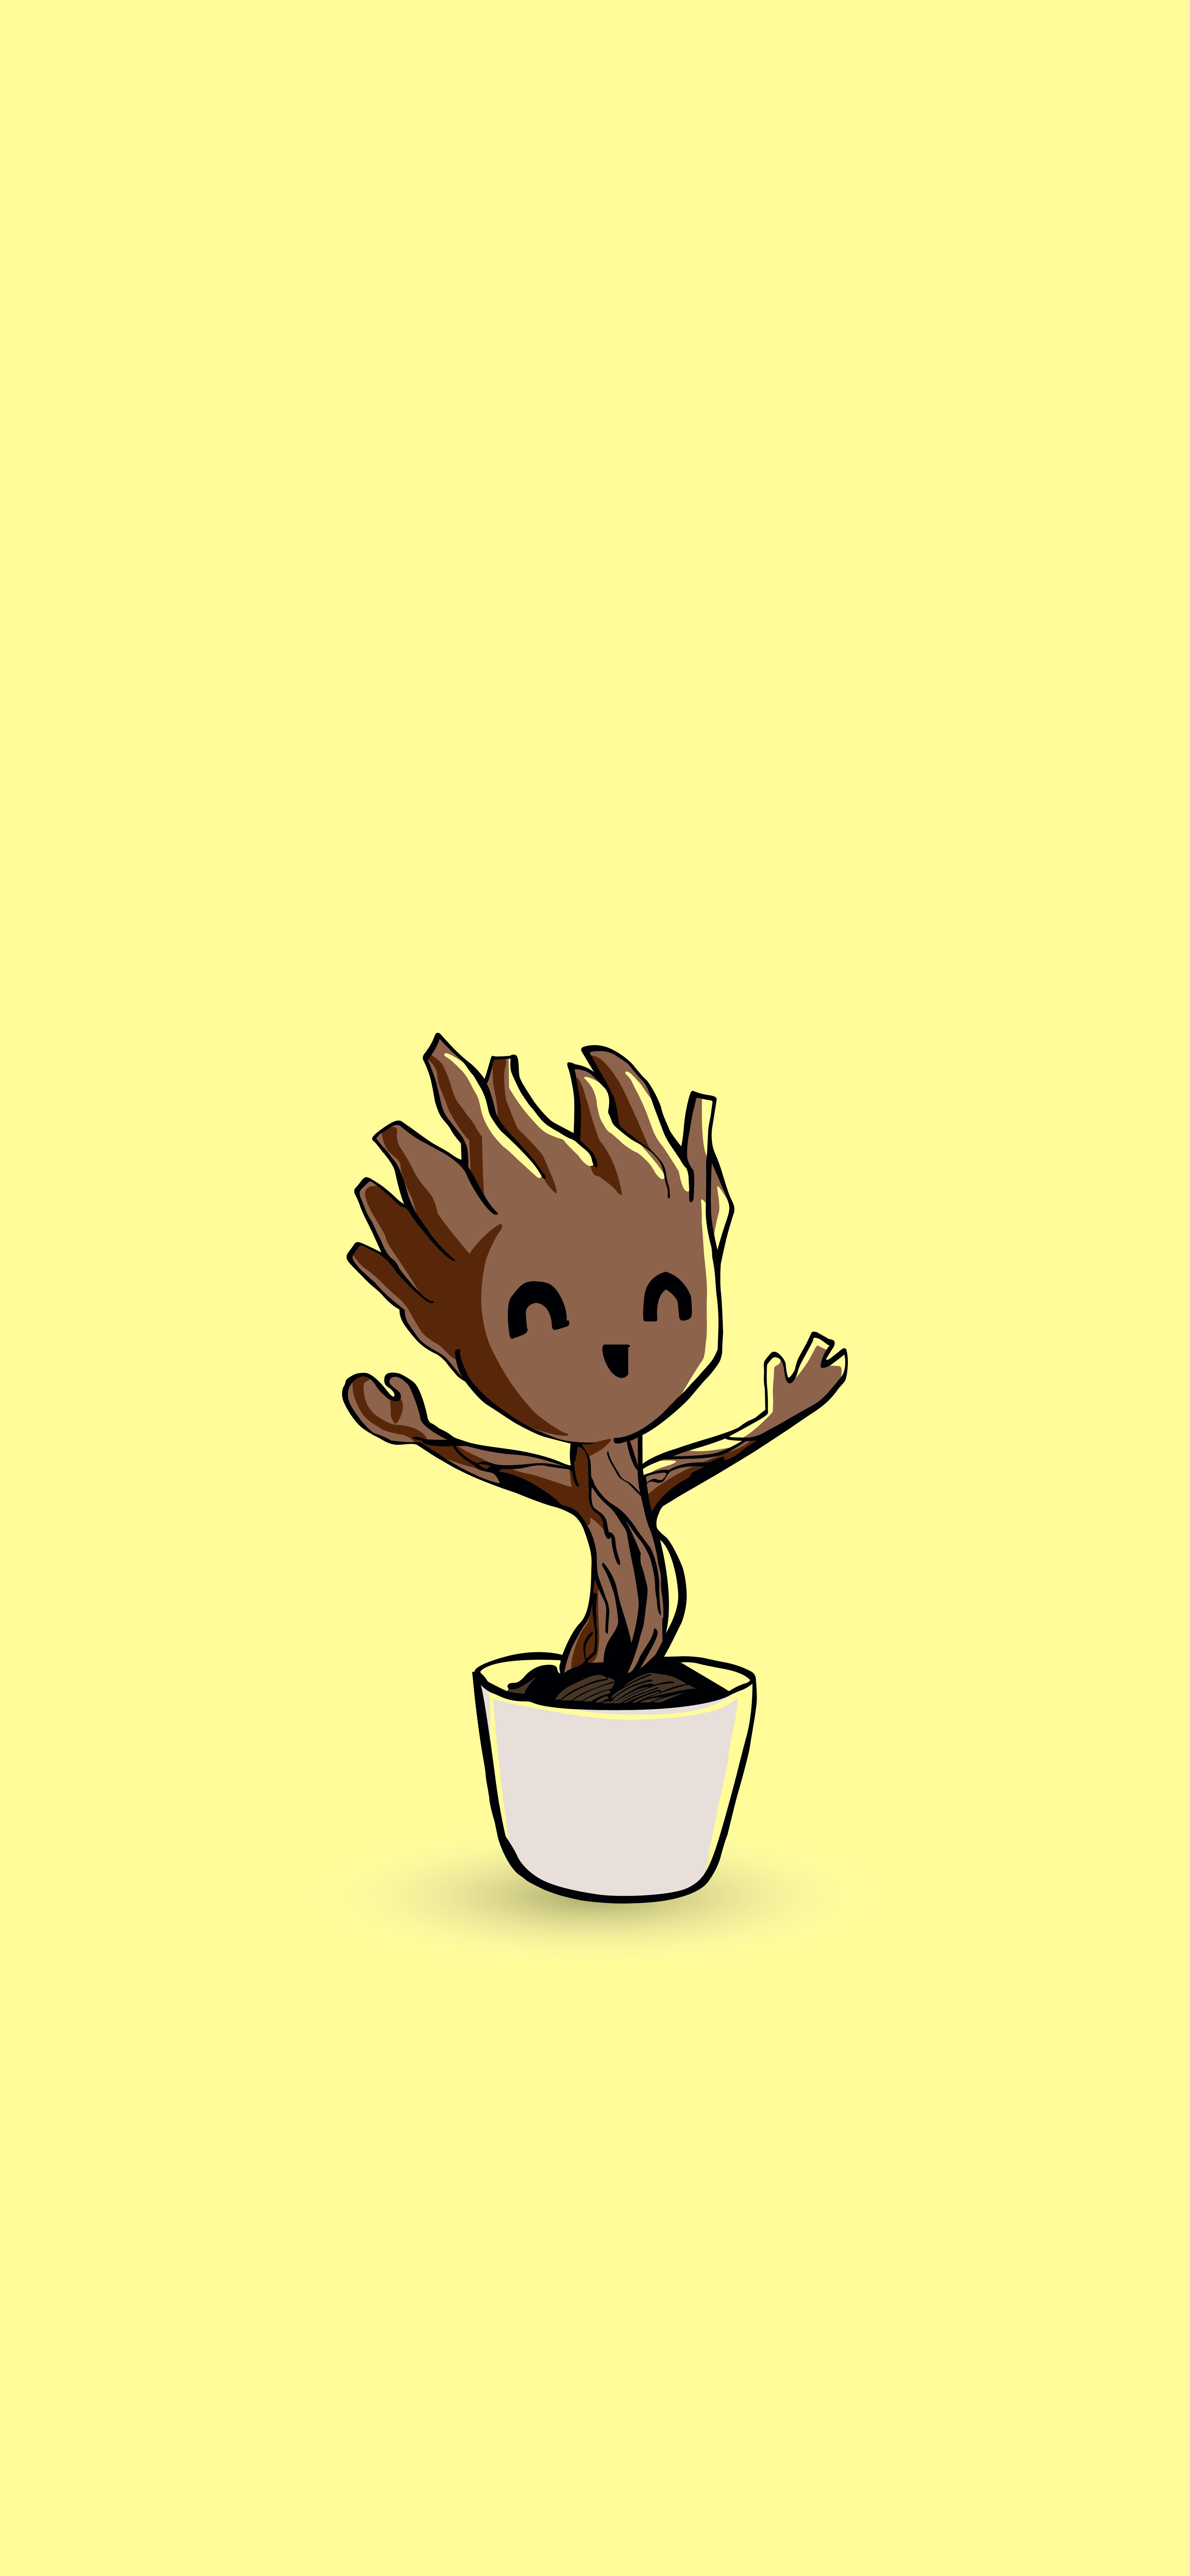 Baby Groot Ultra HD 4k Wallpaper for iPhone X. Superhero wallpaper, iPhone wallpaper, Baby groot